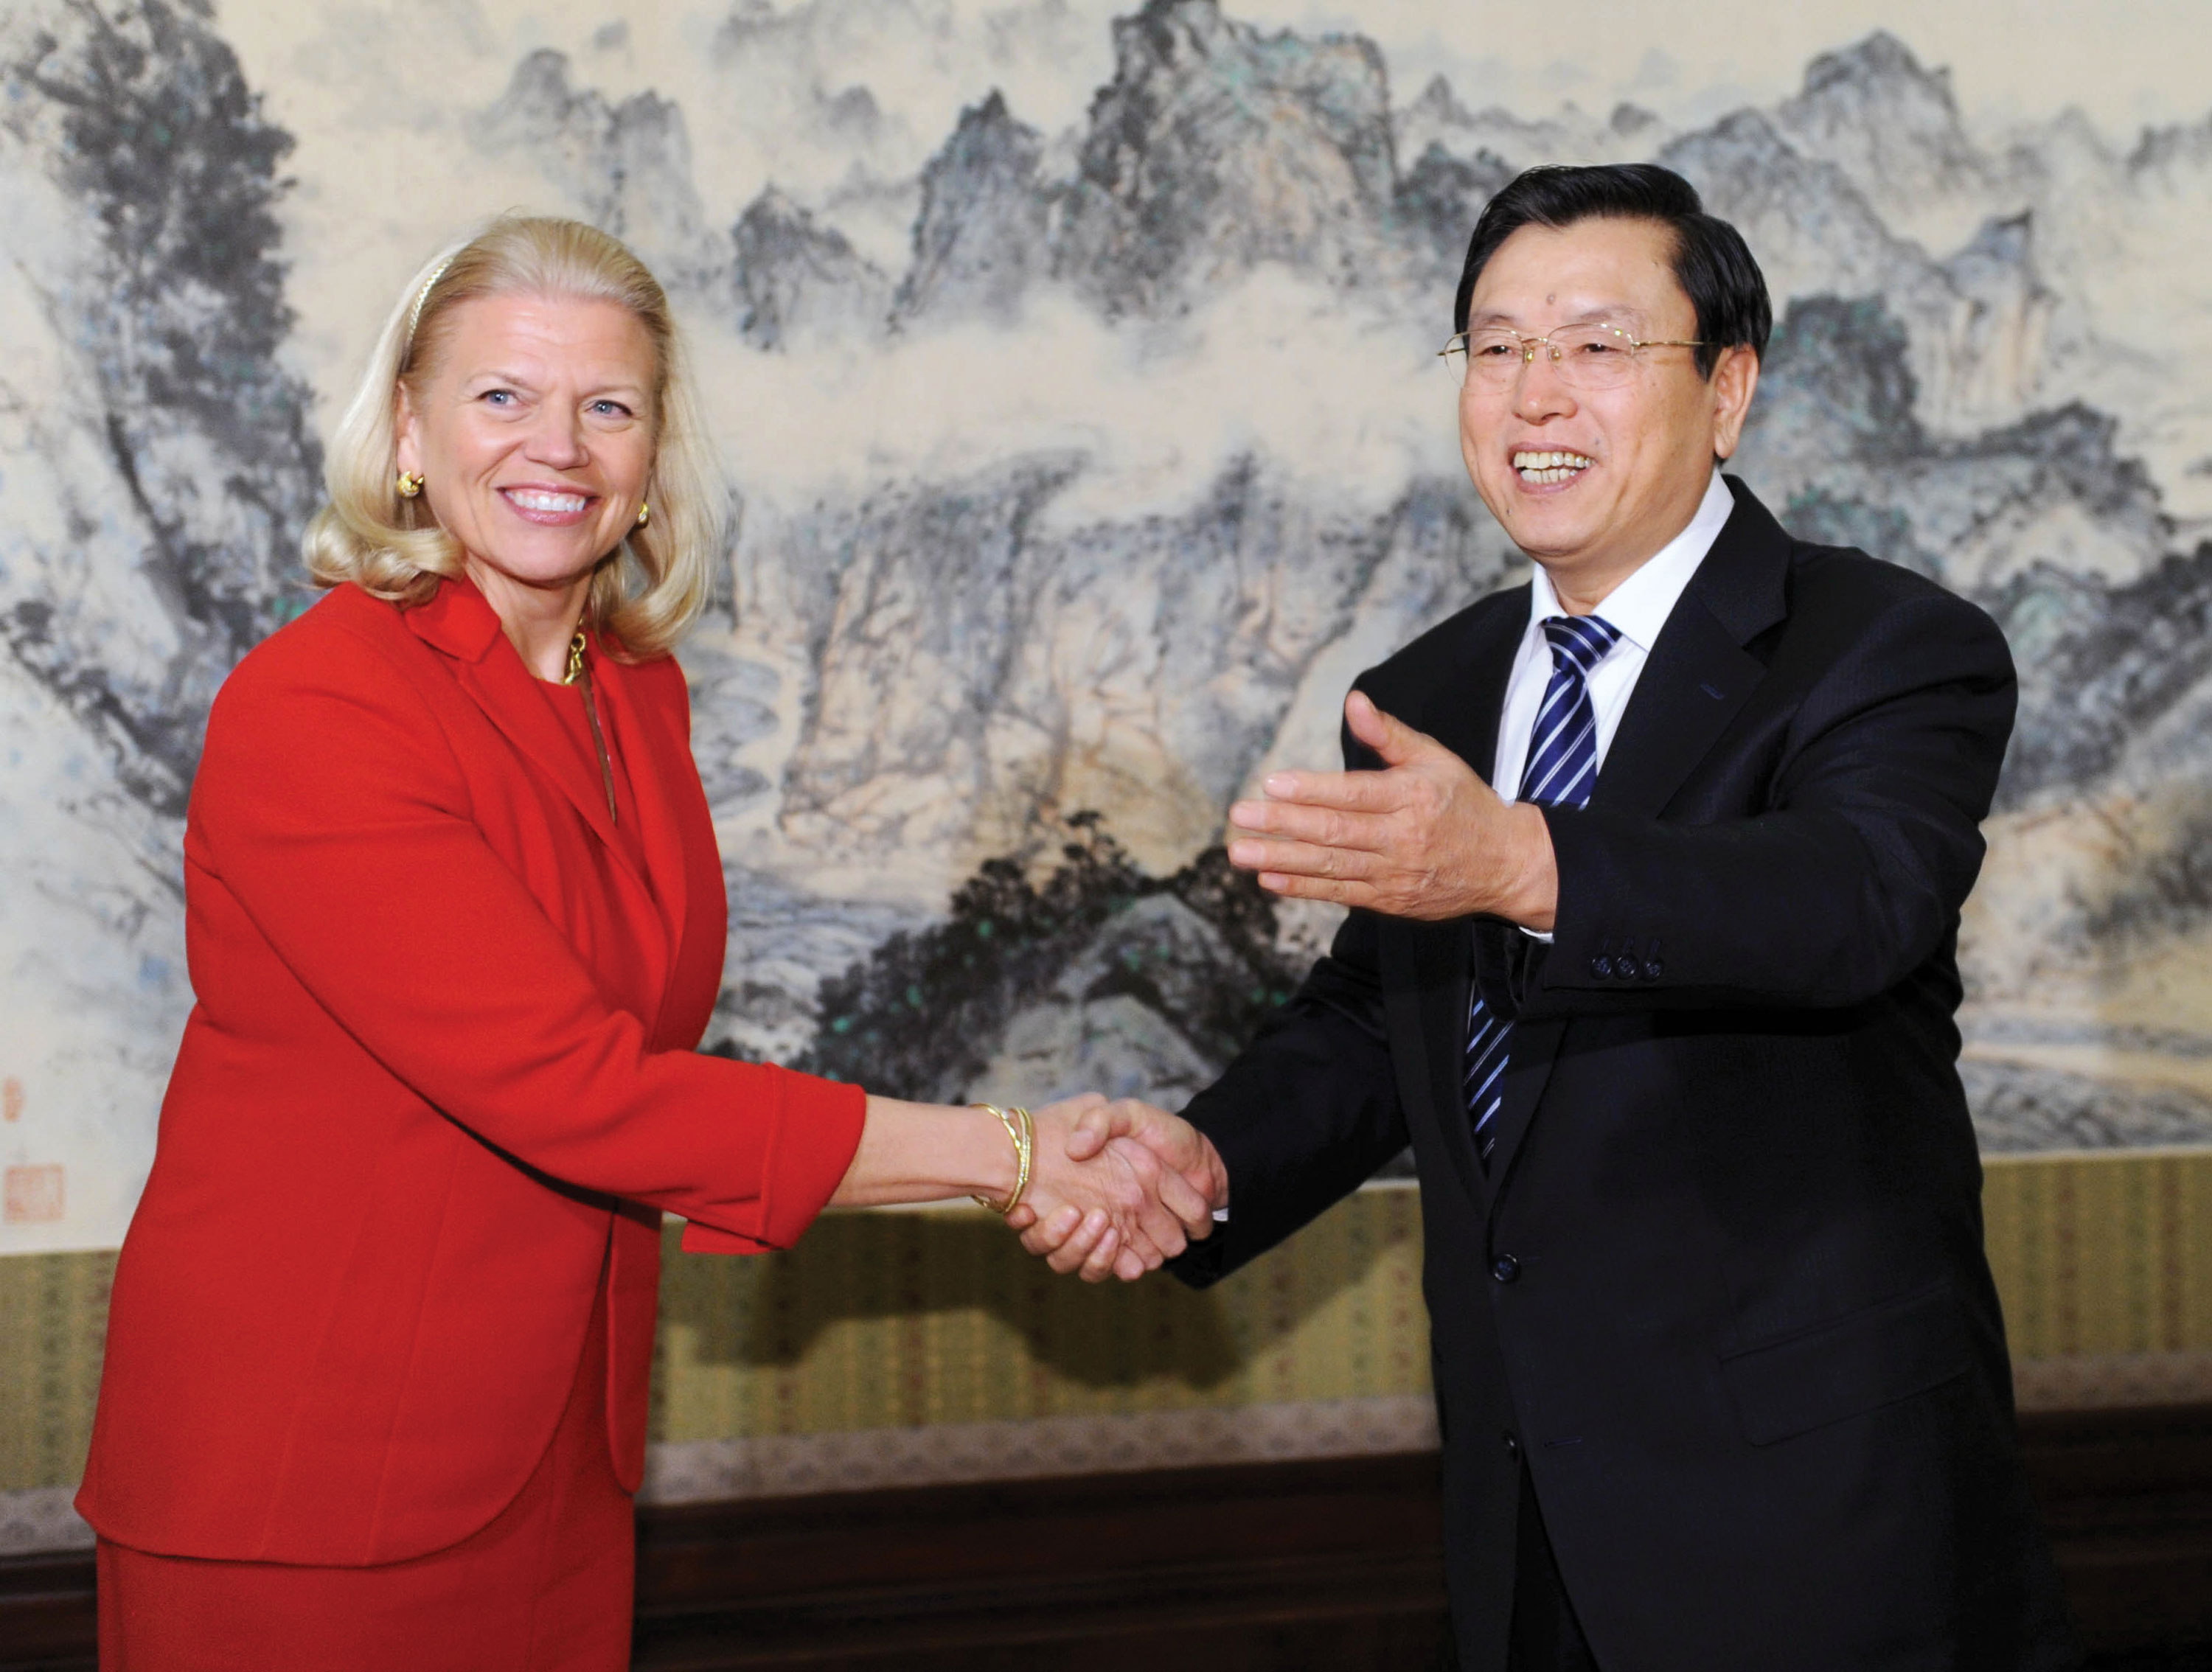 Photo of Virginia Rometty shaking hands with a man in Beijing while smiling